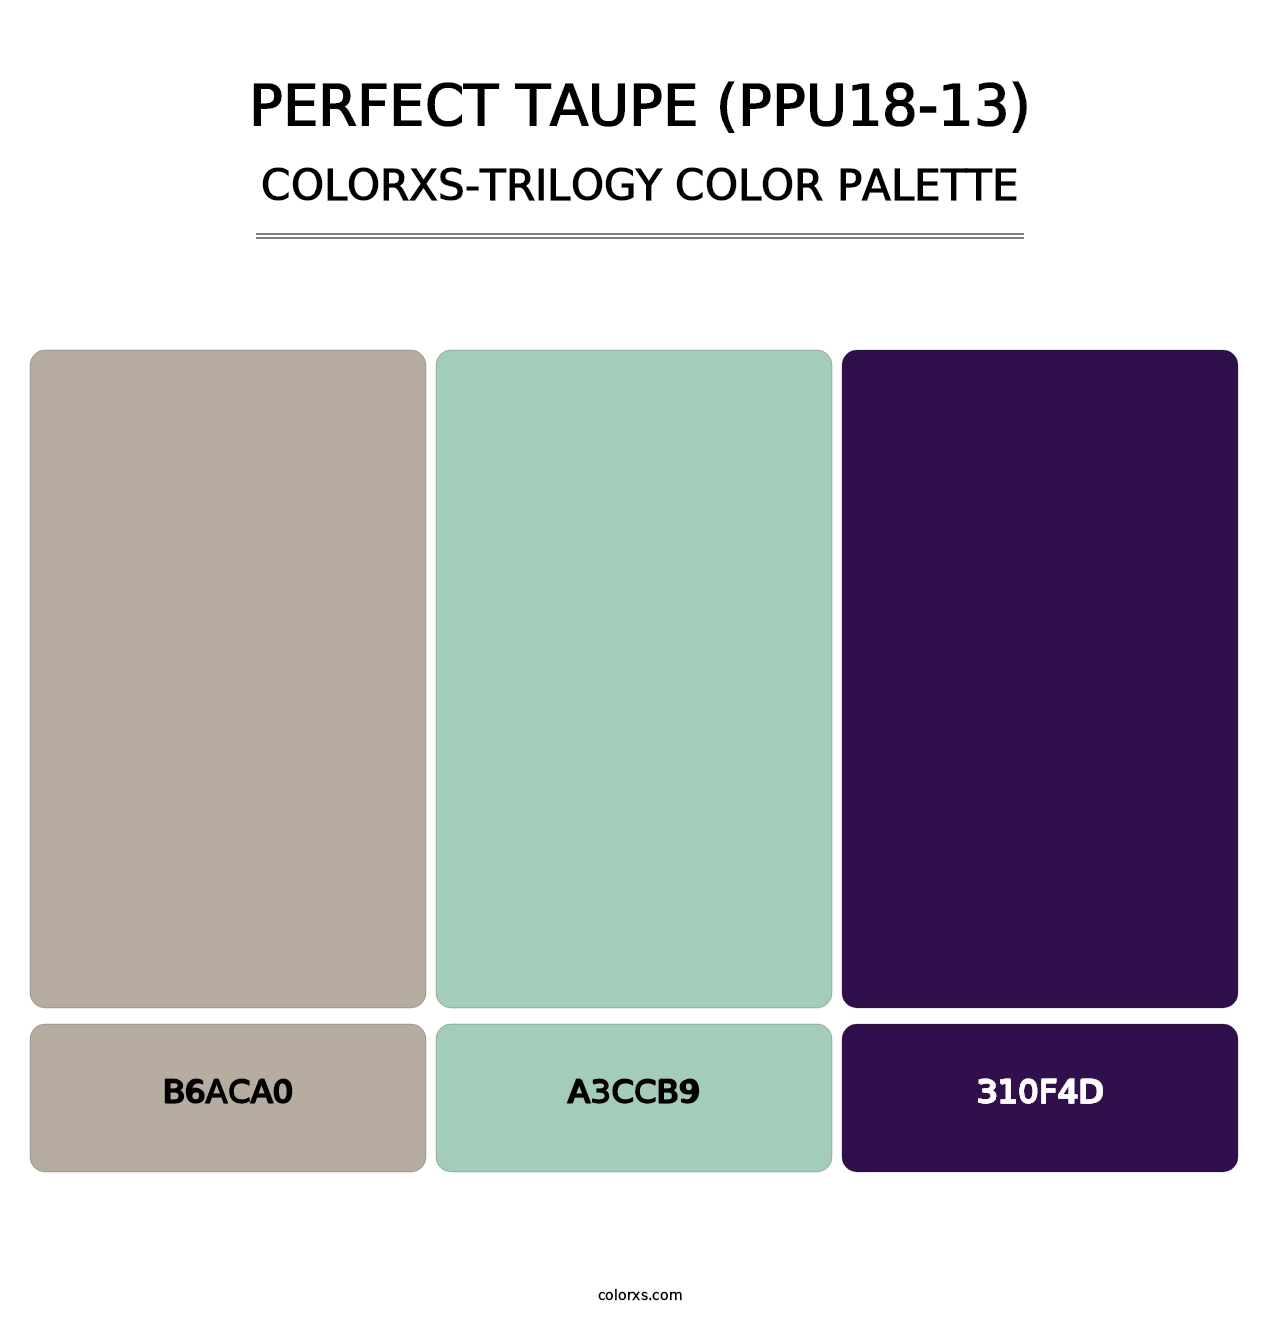 Perfect Taupe (PPU18-13) - Colorxs Trilogy Palette